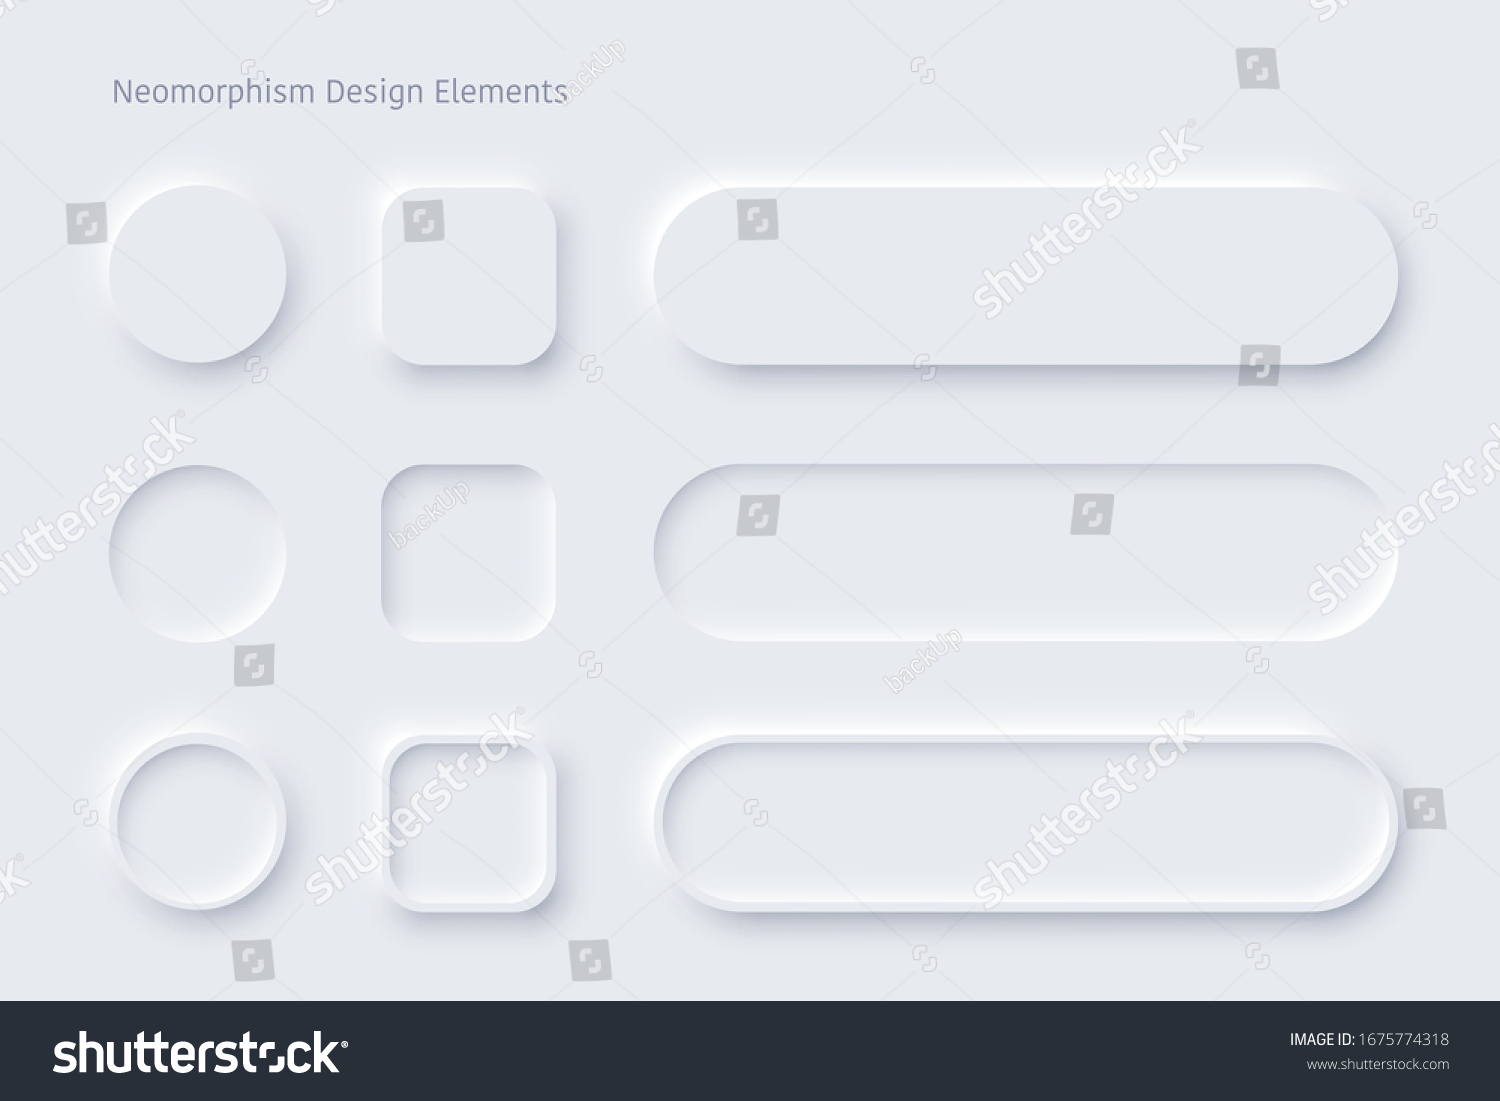 Vector editable neomorphic buttons set. Sliders for  websites, mobile menu, navigation and apps. Simple elegant Neomorphism trendy 2020 designs element UI components isolated on white background #1675774318